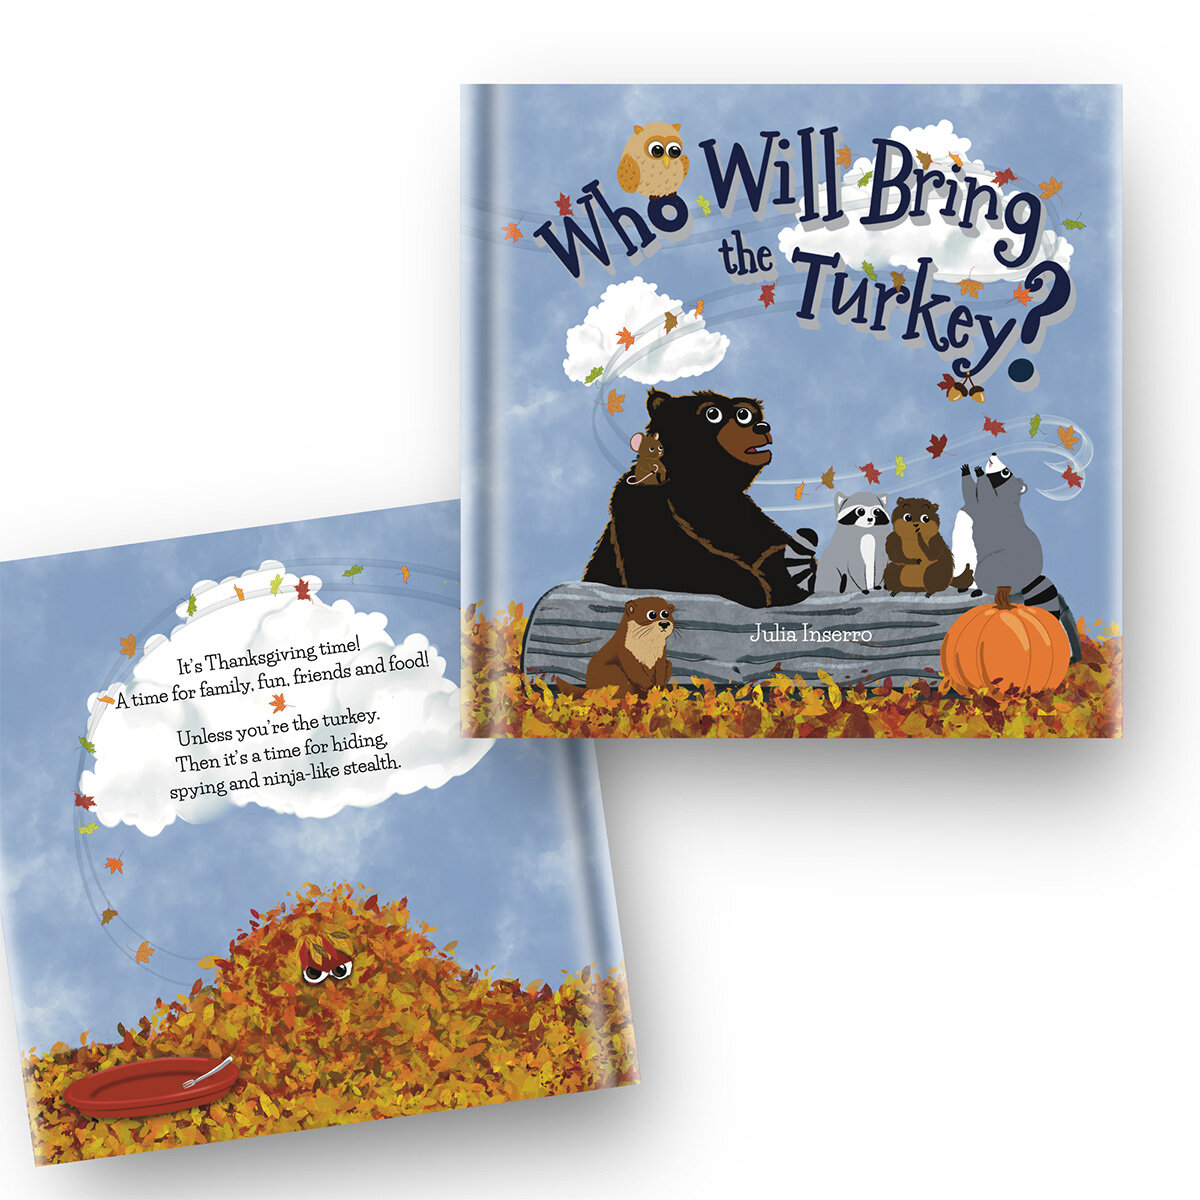 “Who Will Bring the Turkey?” is a story about a misunderstanding that leads to a turkey's meltdown.